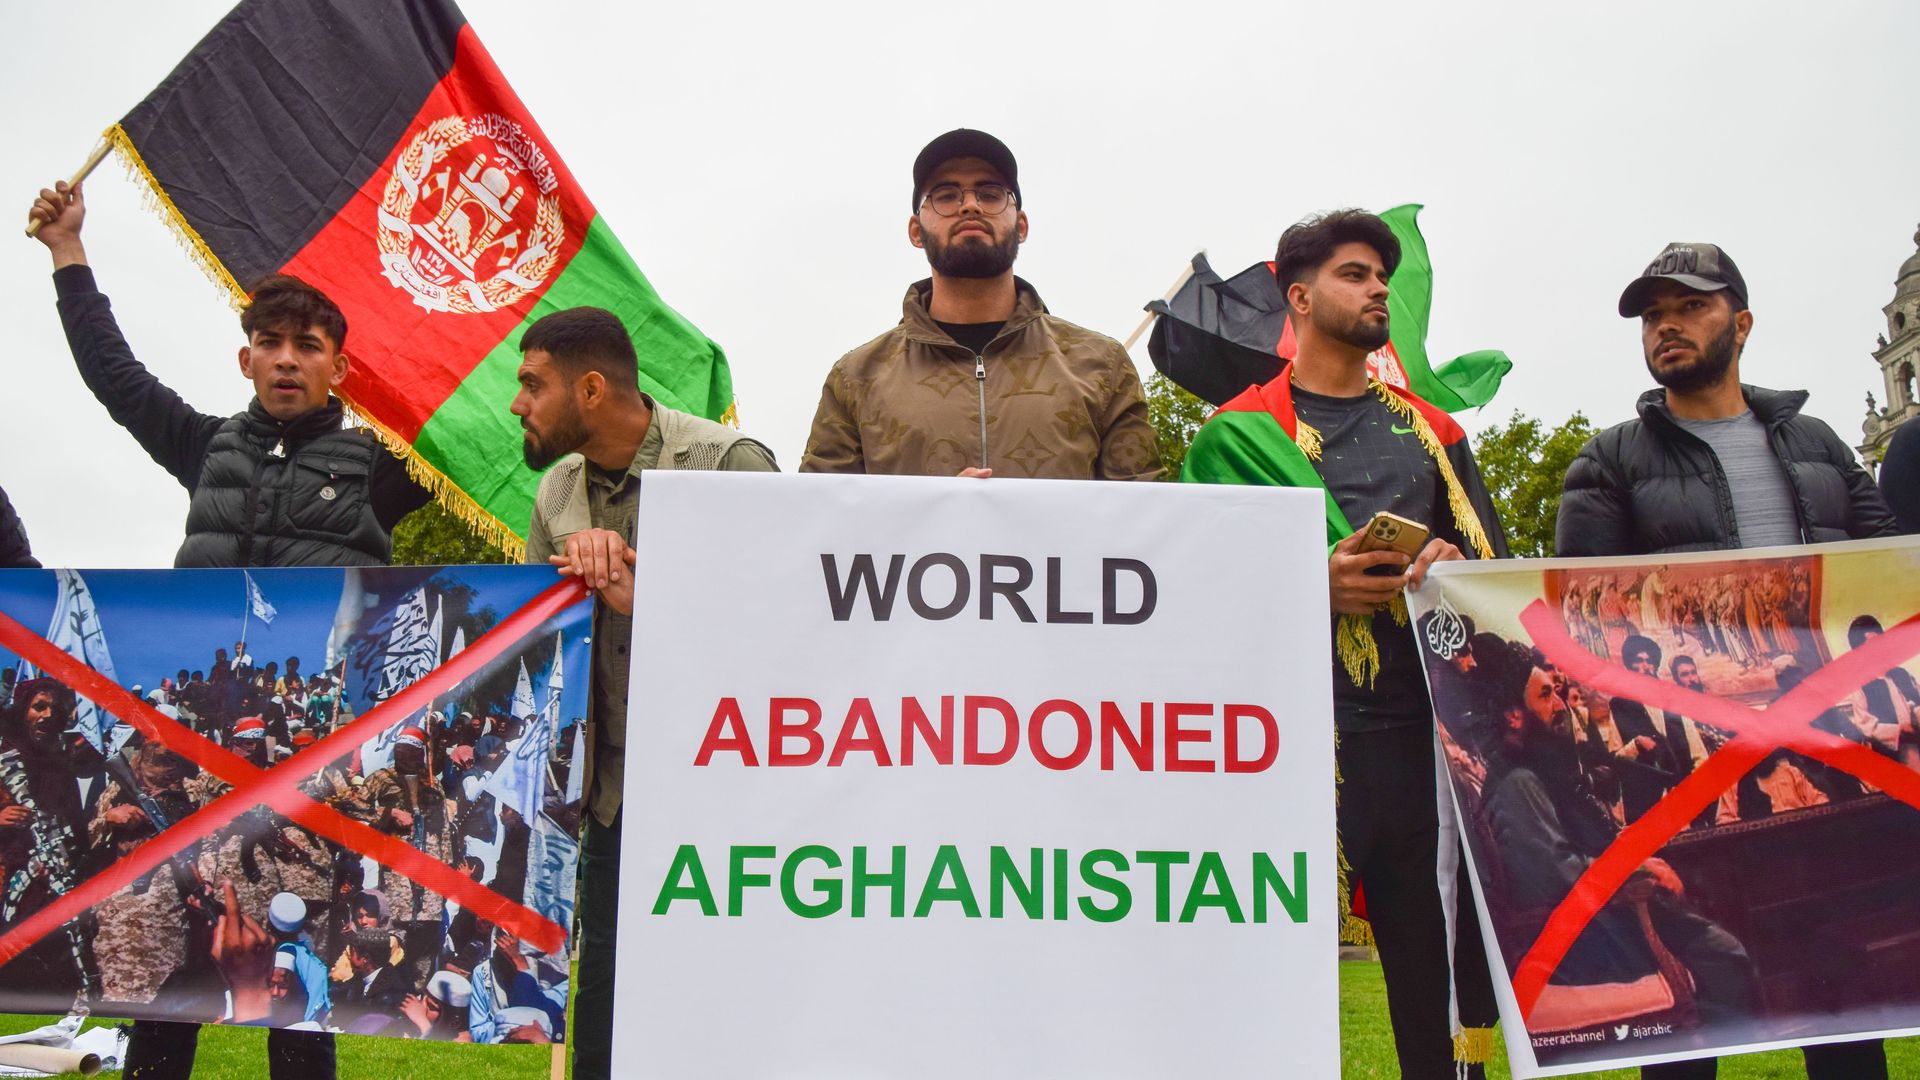 Photo of a protester holding a sign that says "World abandoned Afghanistan"